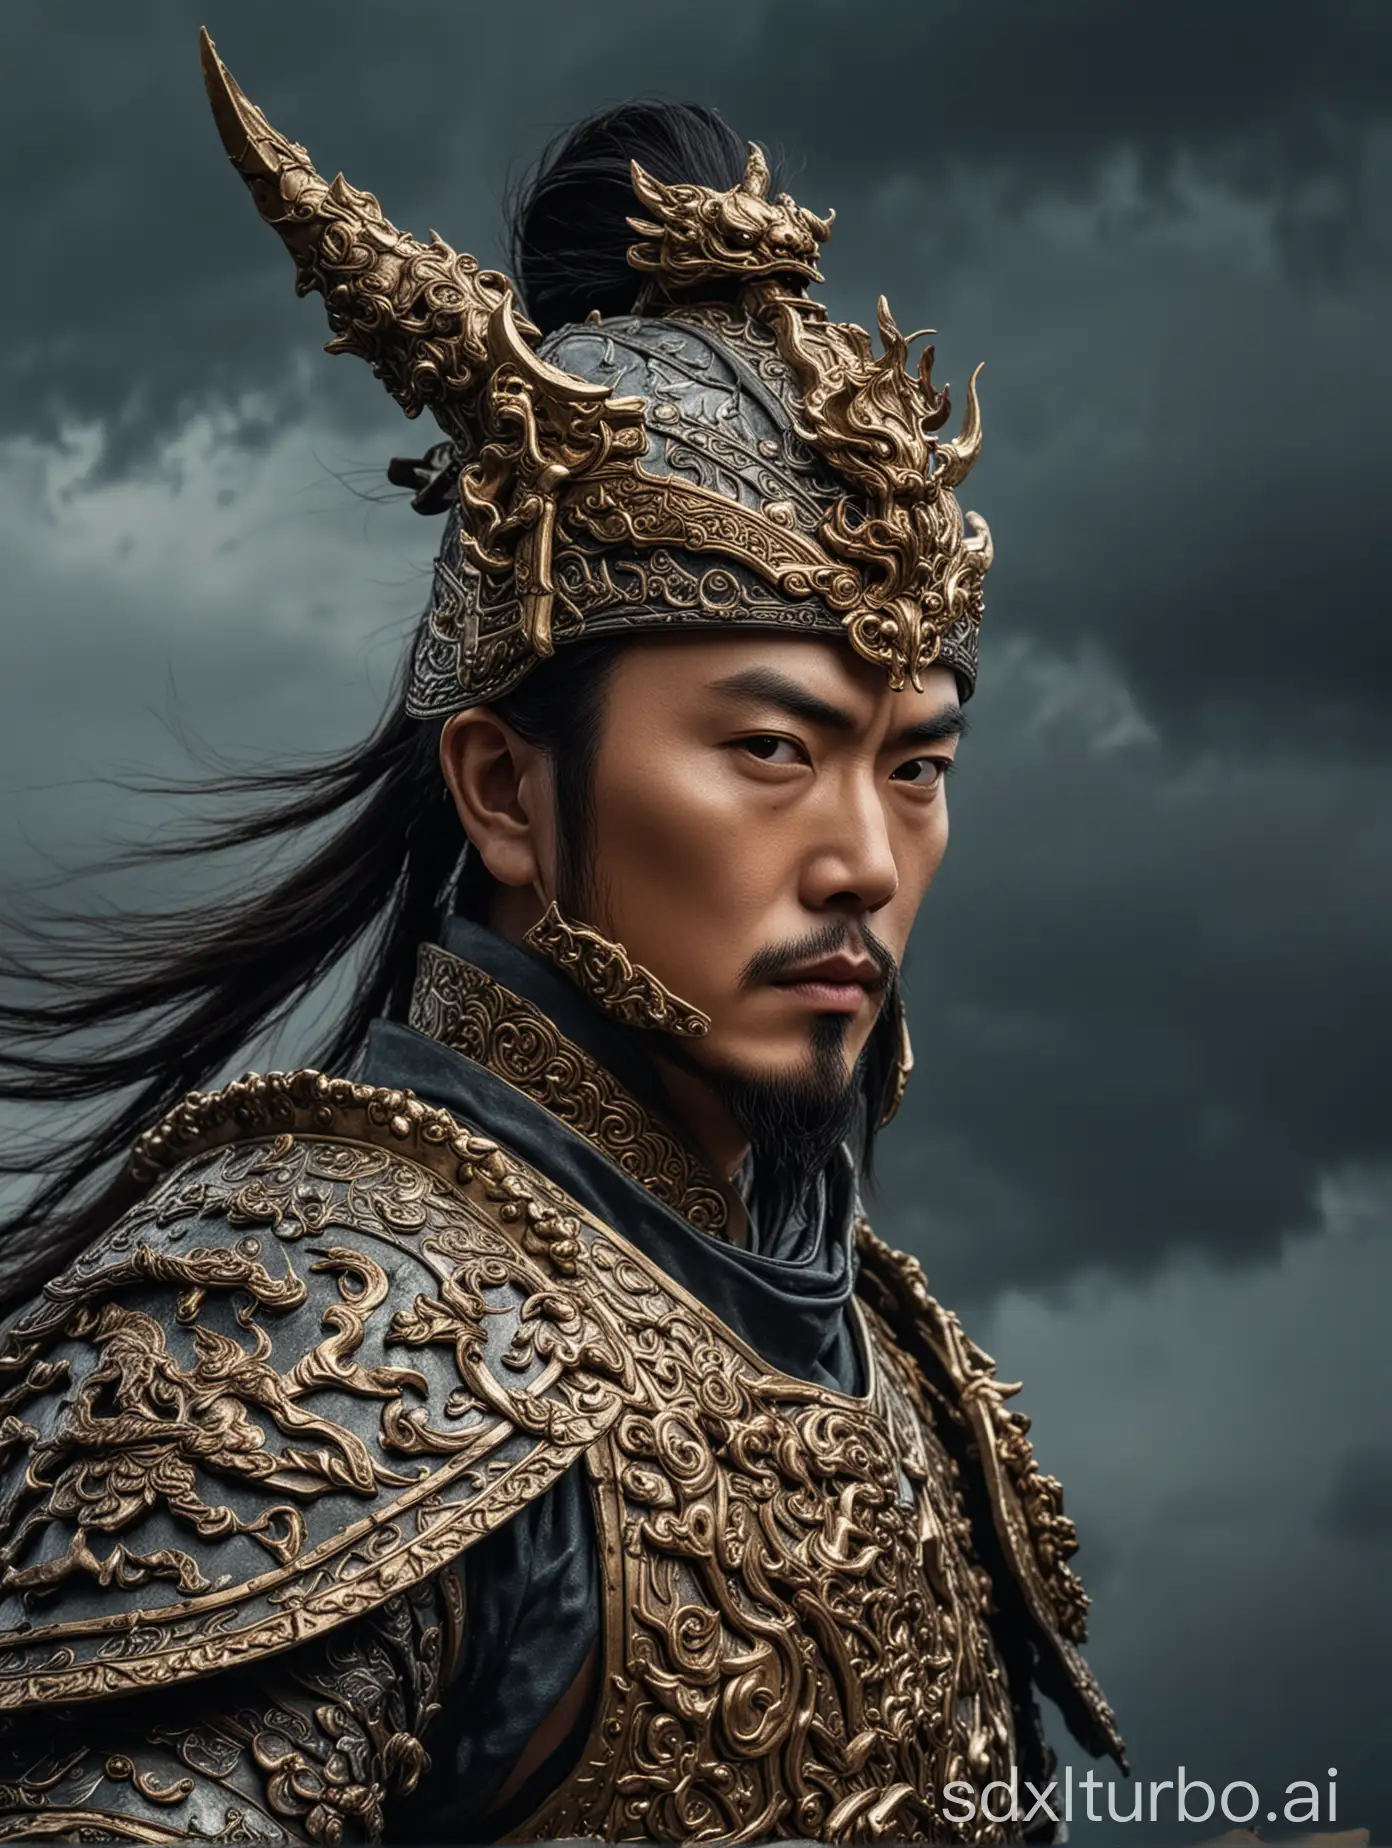 A fierce close-up portrait of Lu Bu in ornate armor, his halberd held vertically, with a dramatic stormy sky background.